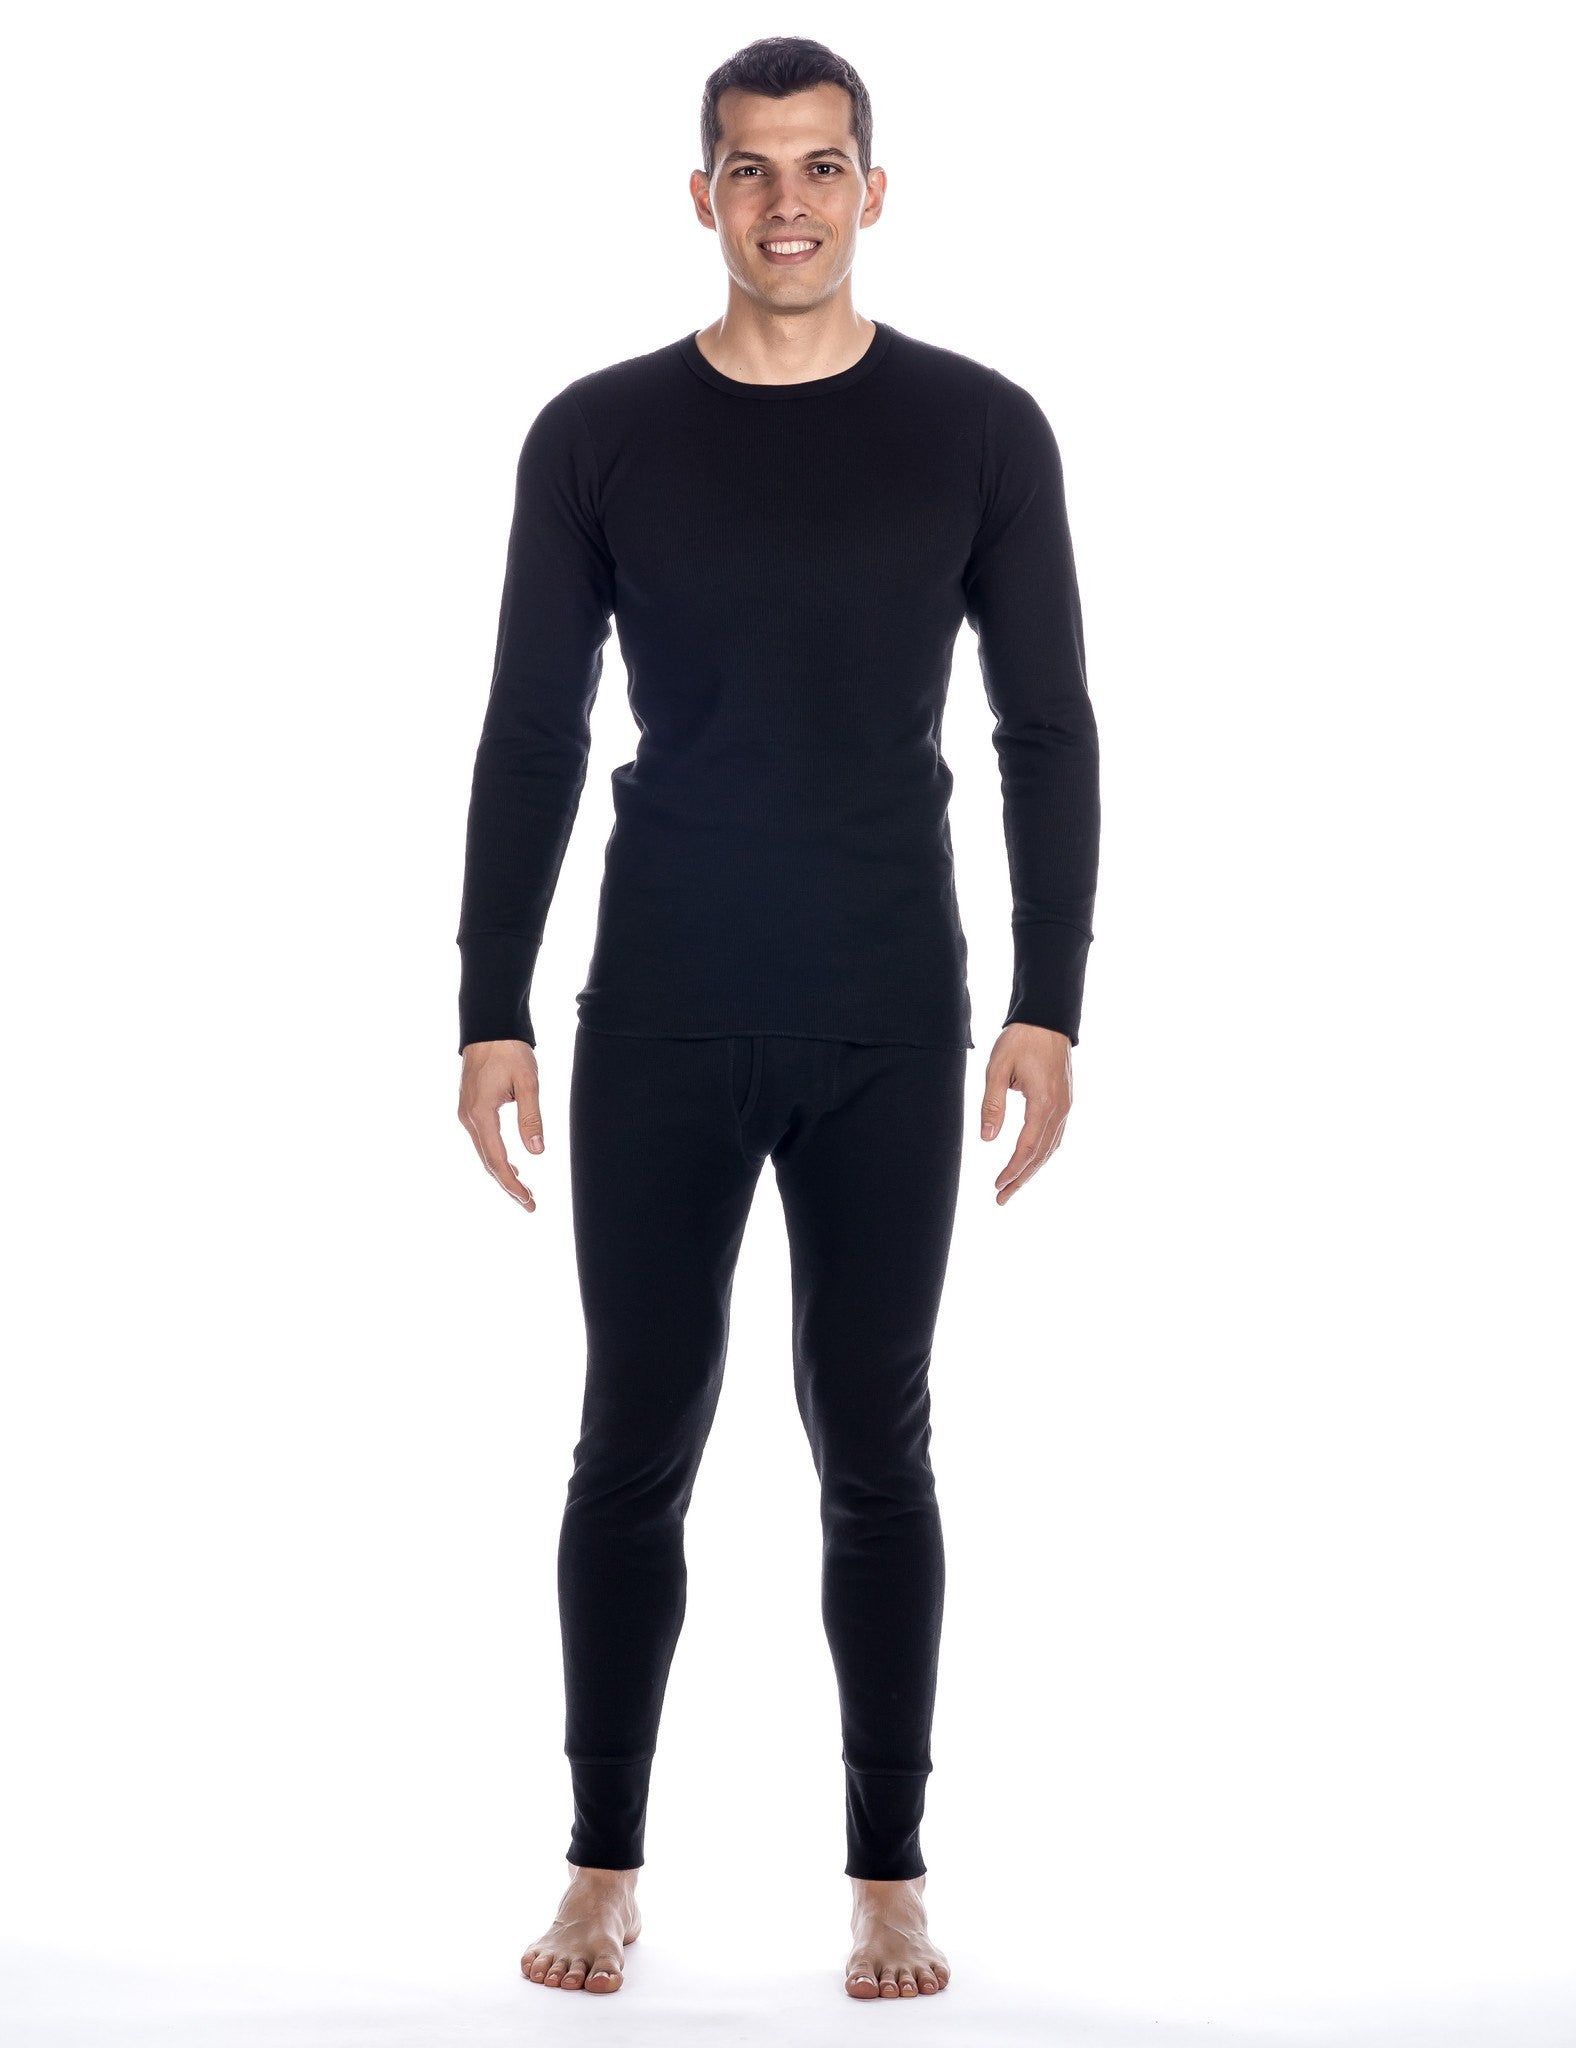 Men's Classic Waffle Knit Thermal Top and Bottom Set